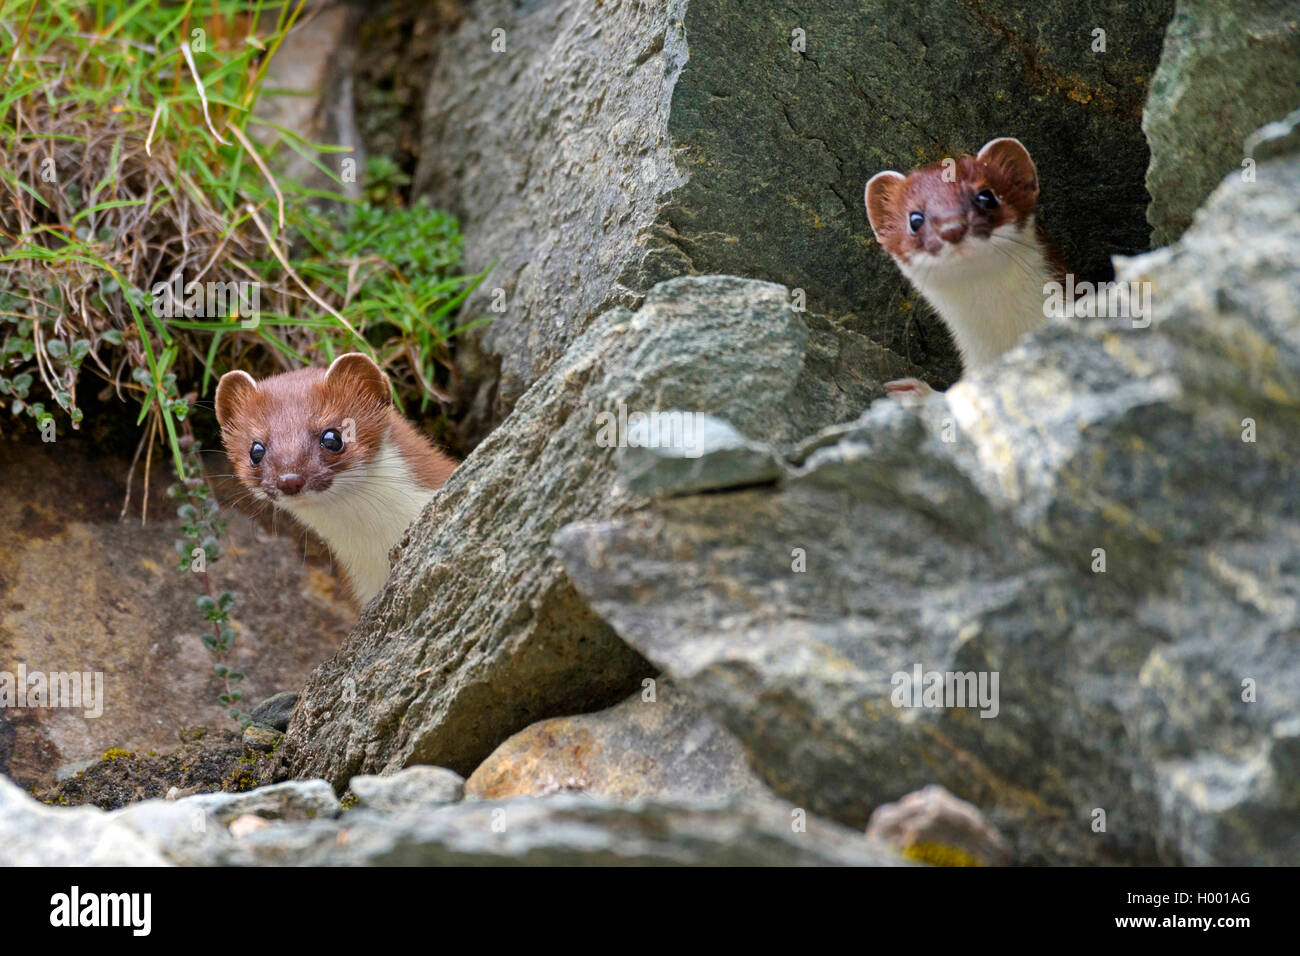 Ermine, Stoat, Short-tailed weasel (Mustela erminea), two ermines look out of their hide, Italy, South Tyrol Stock Photo